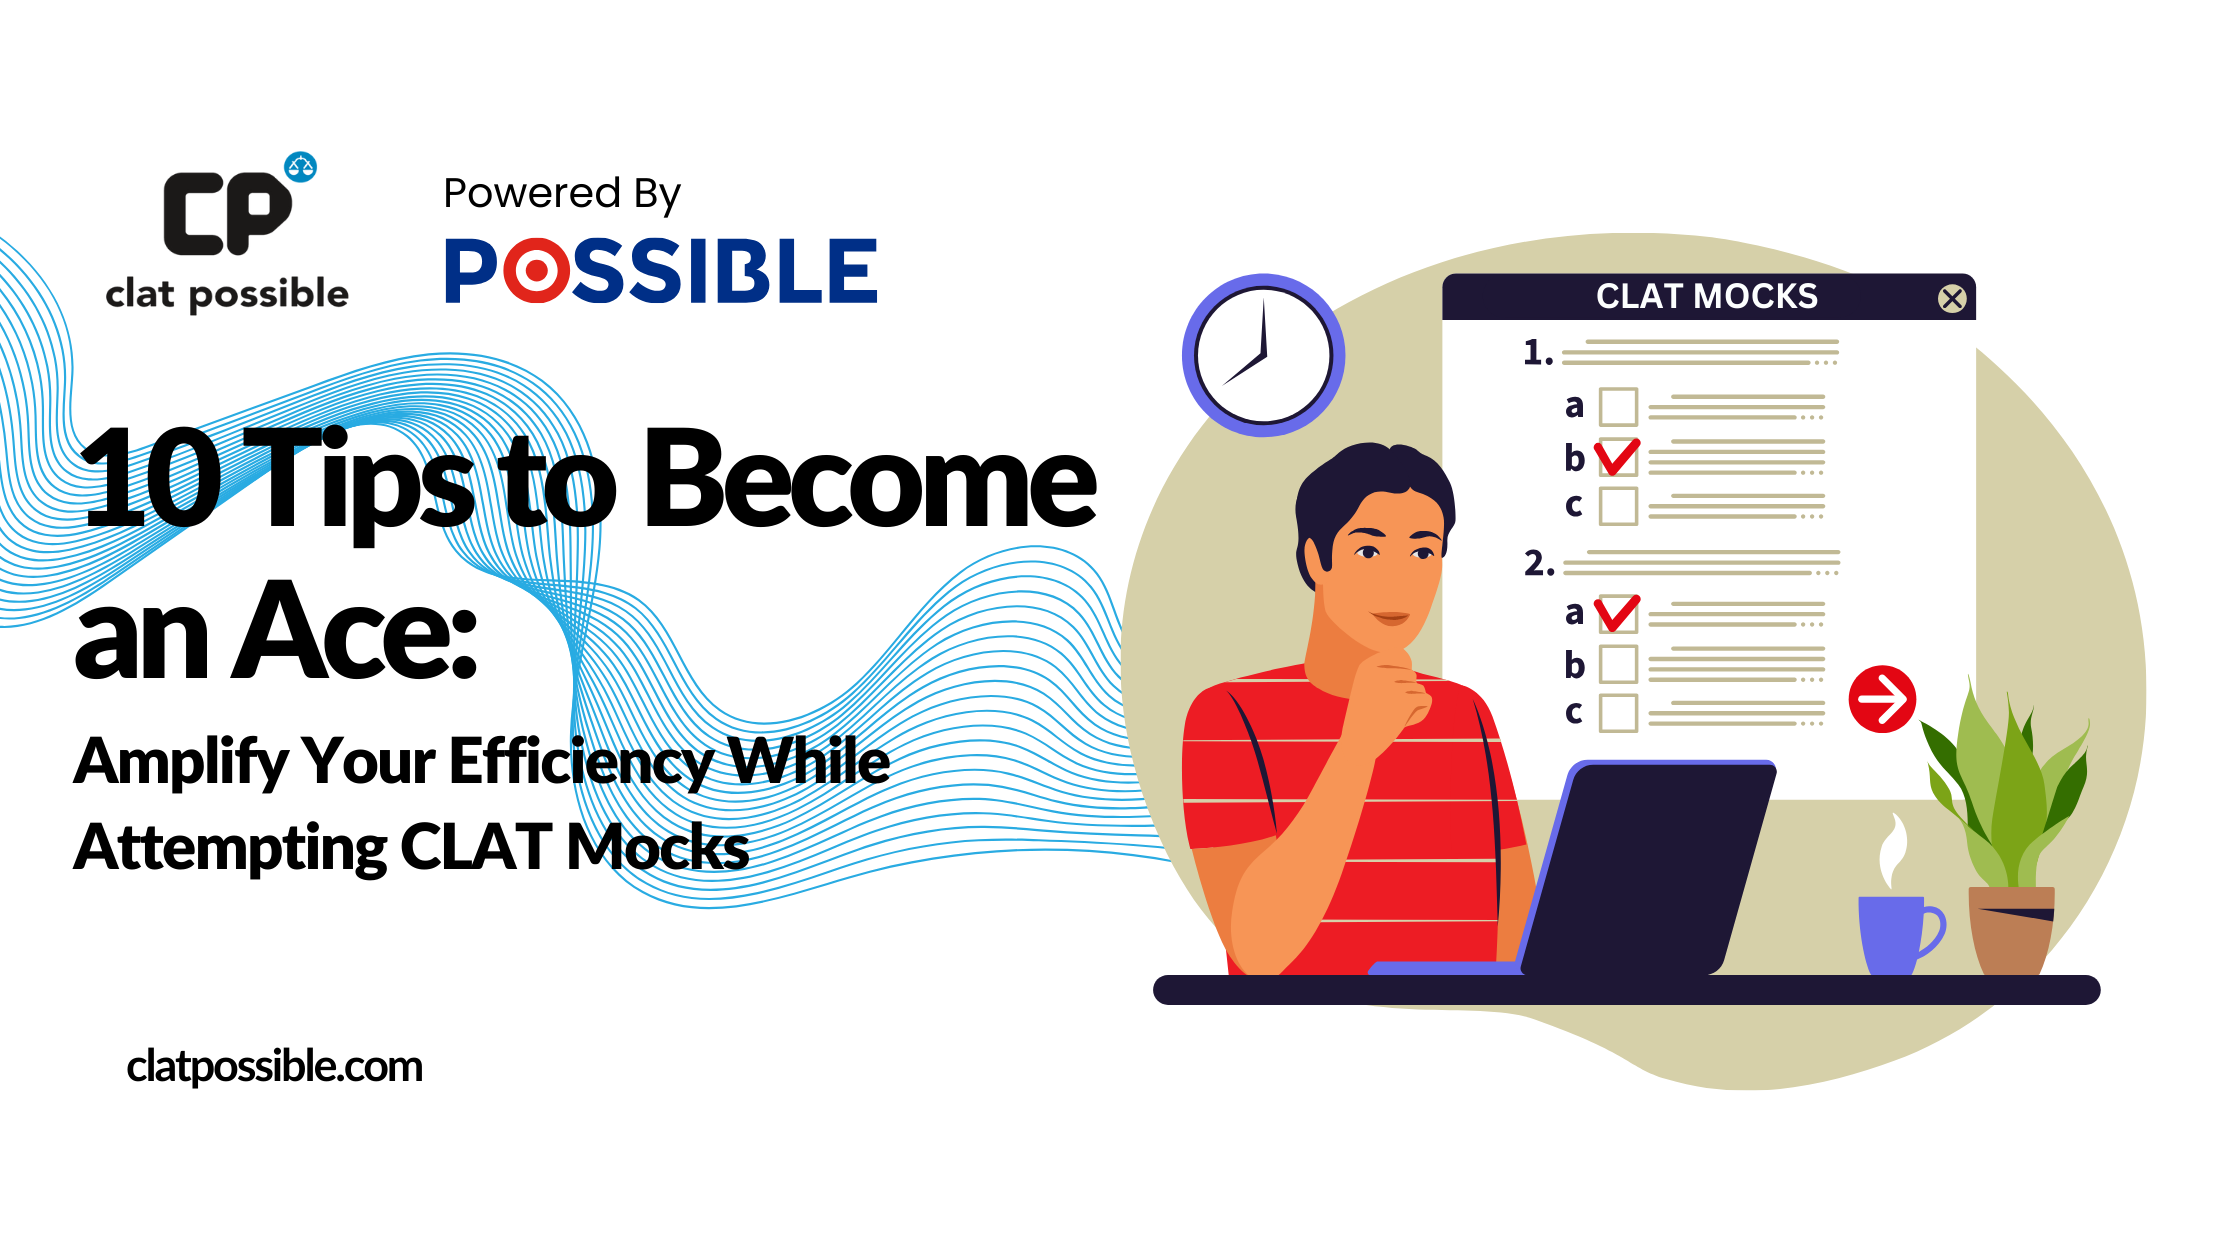 10 Tips to Become an Ace: Amplify Your Efficiency While Attempting CLAT Mocks